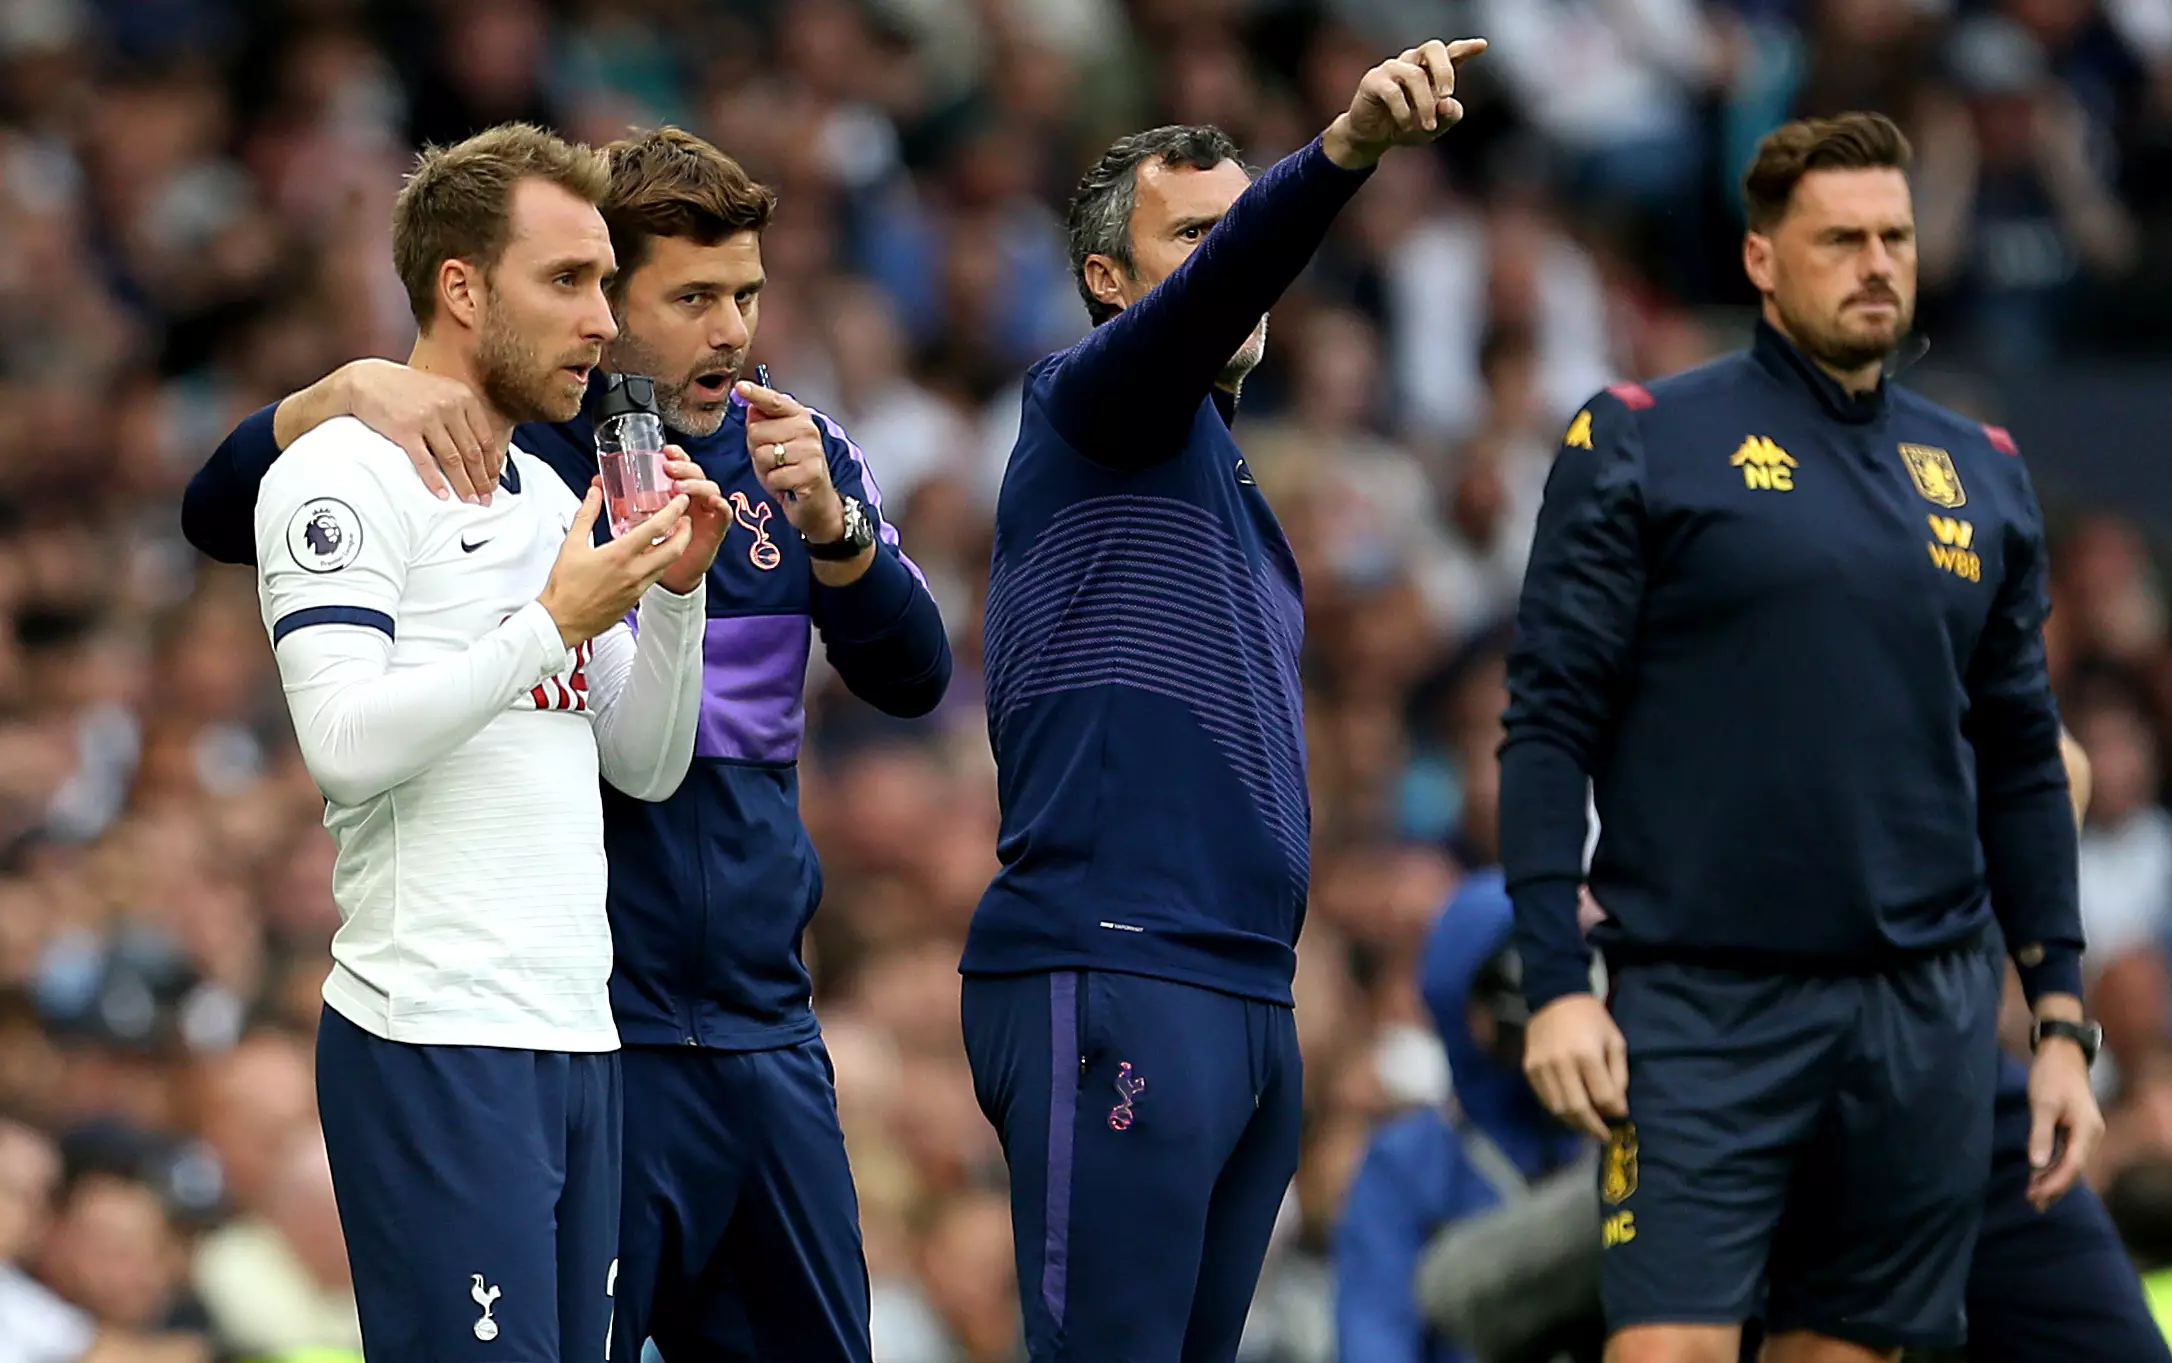 Questions remained about Eriksen's immediate future up until Monday. Image: PA Images